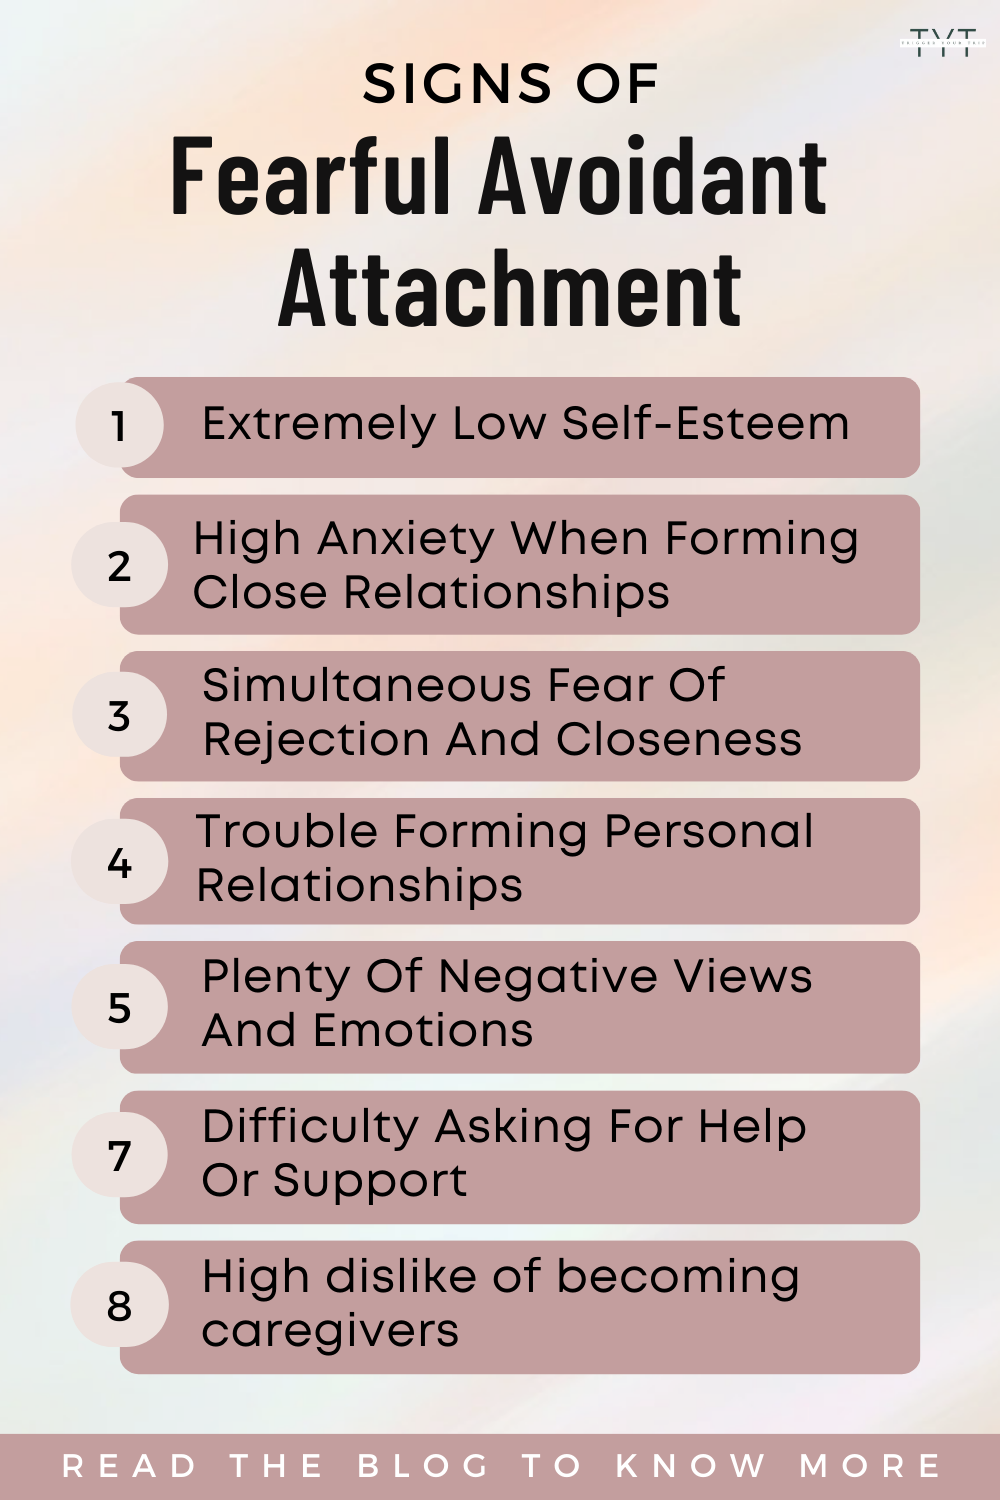 attachment style may vary but if you want to seek support to increase your self worth in a stressful situation there are working models available